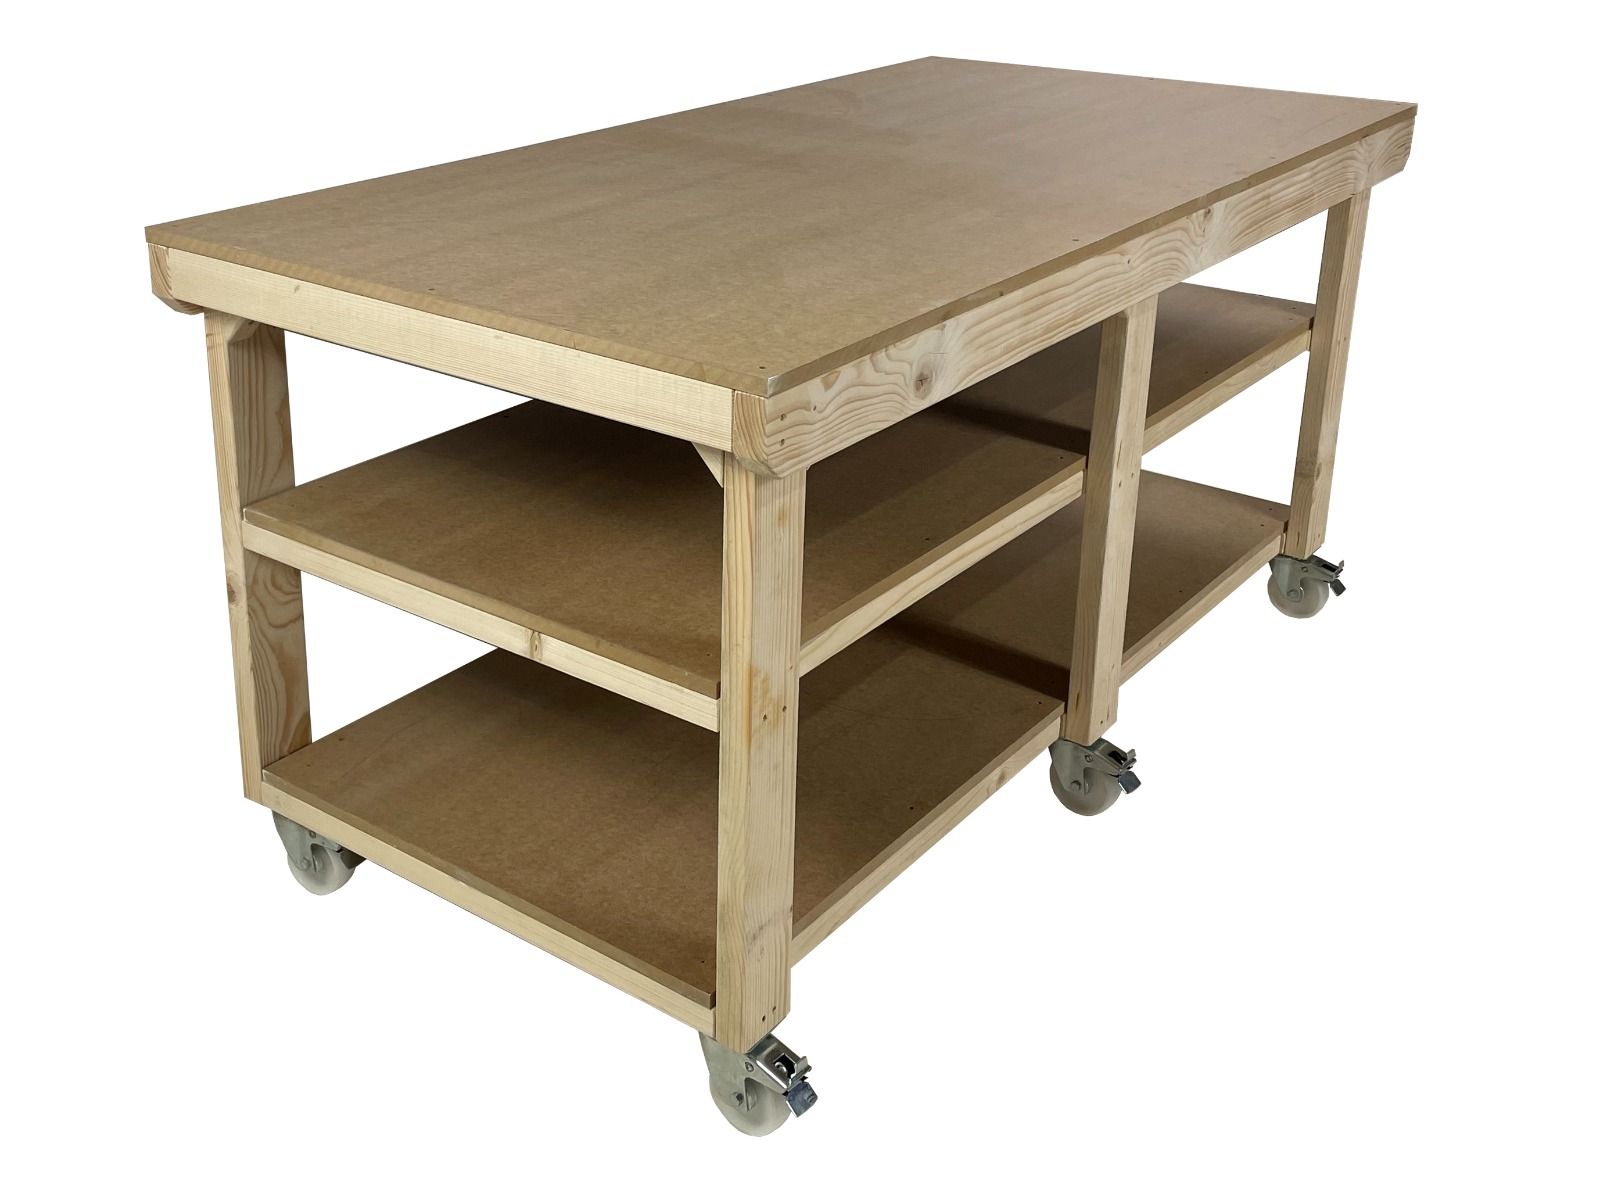 Wooden Workbench Made of Super Heavy Duty Timber, 3ft to 6ft in